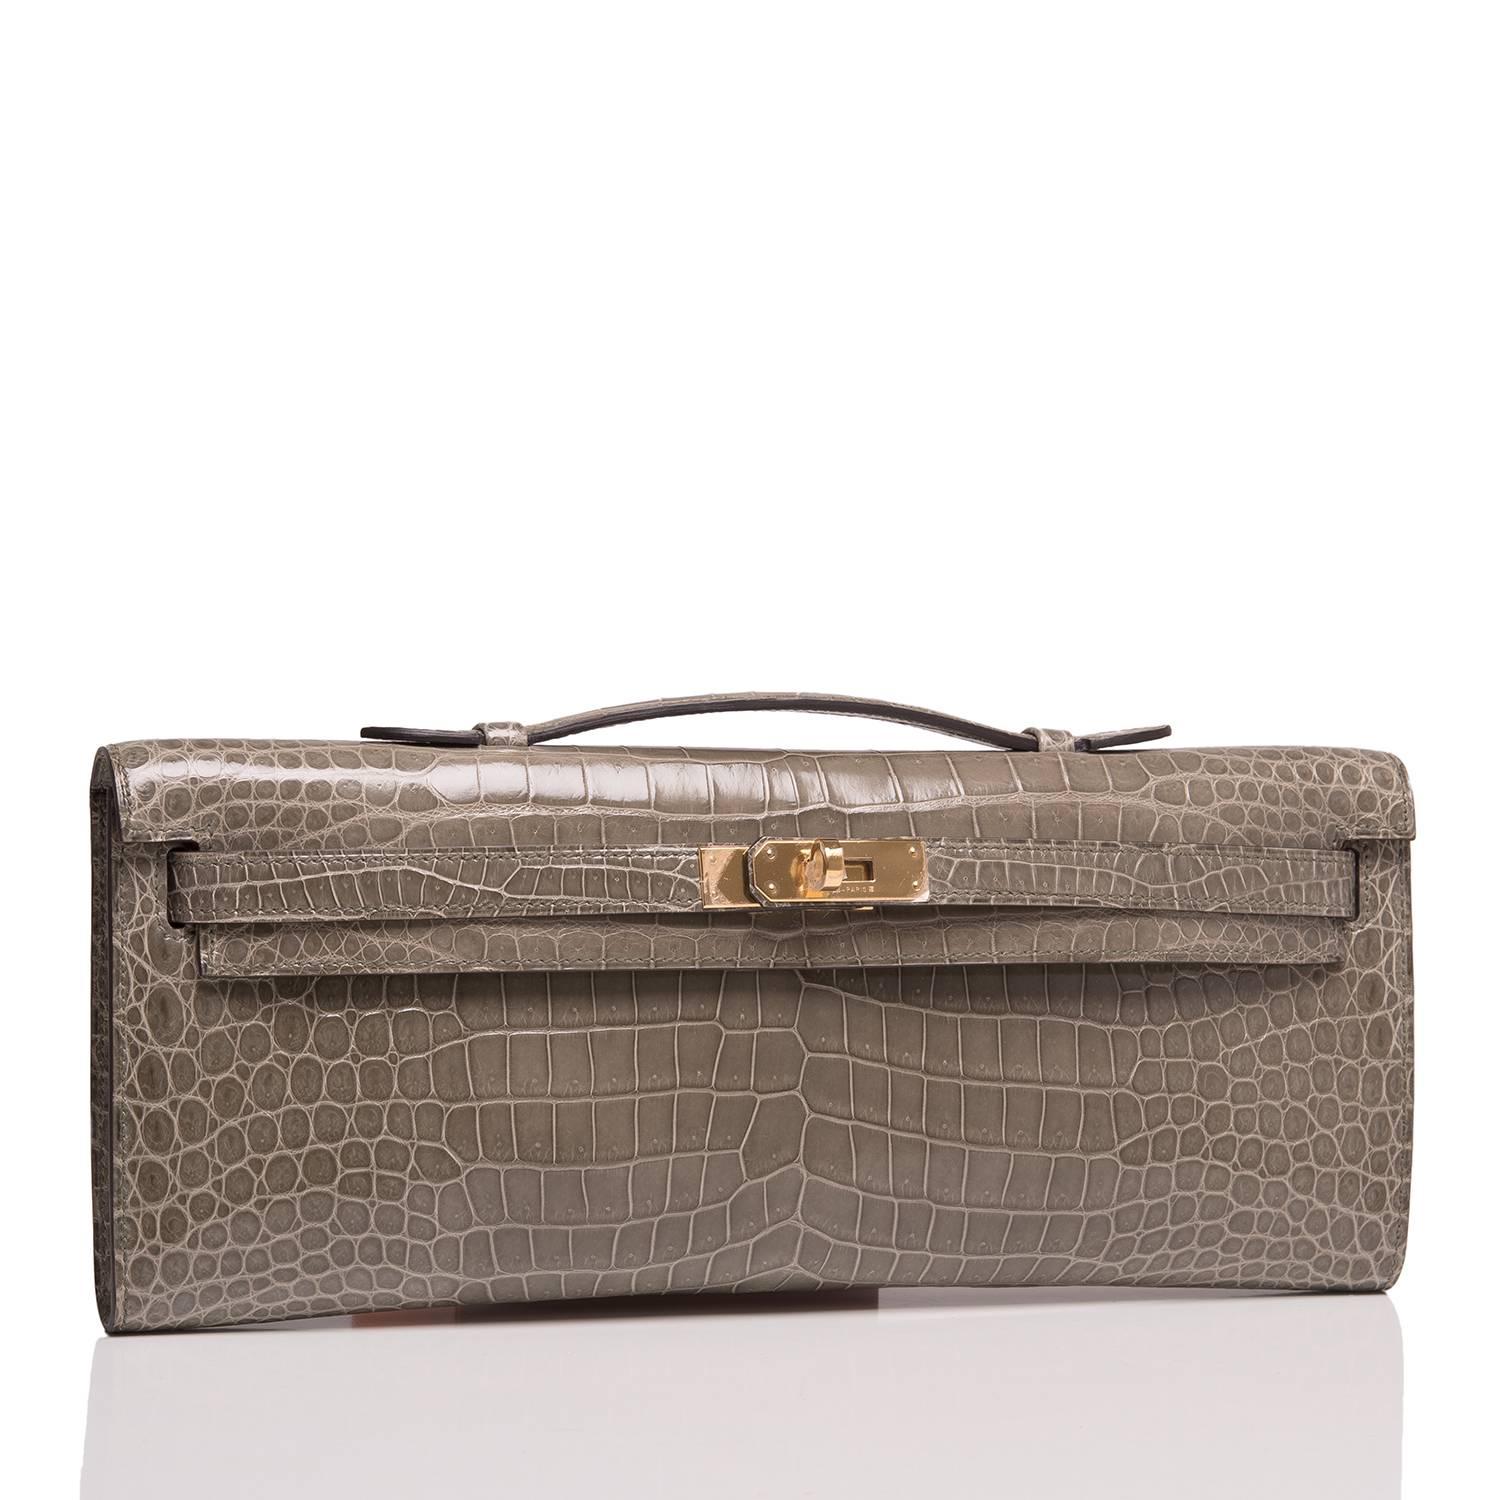 Hermes Gris Tourterelle (Gris T) shiny porosus crocodile Kelly Cut with gold hardware.

This Kelly Cut has tonal stitching, front straps with toggle closure and a top flat handle.

The interior is lined in Gris T chèvre leather and features an